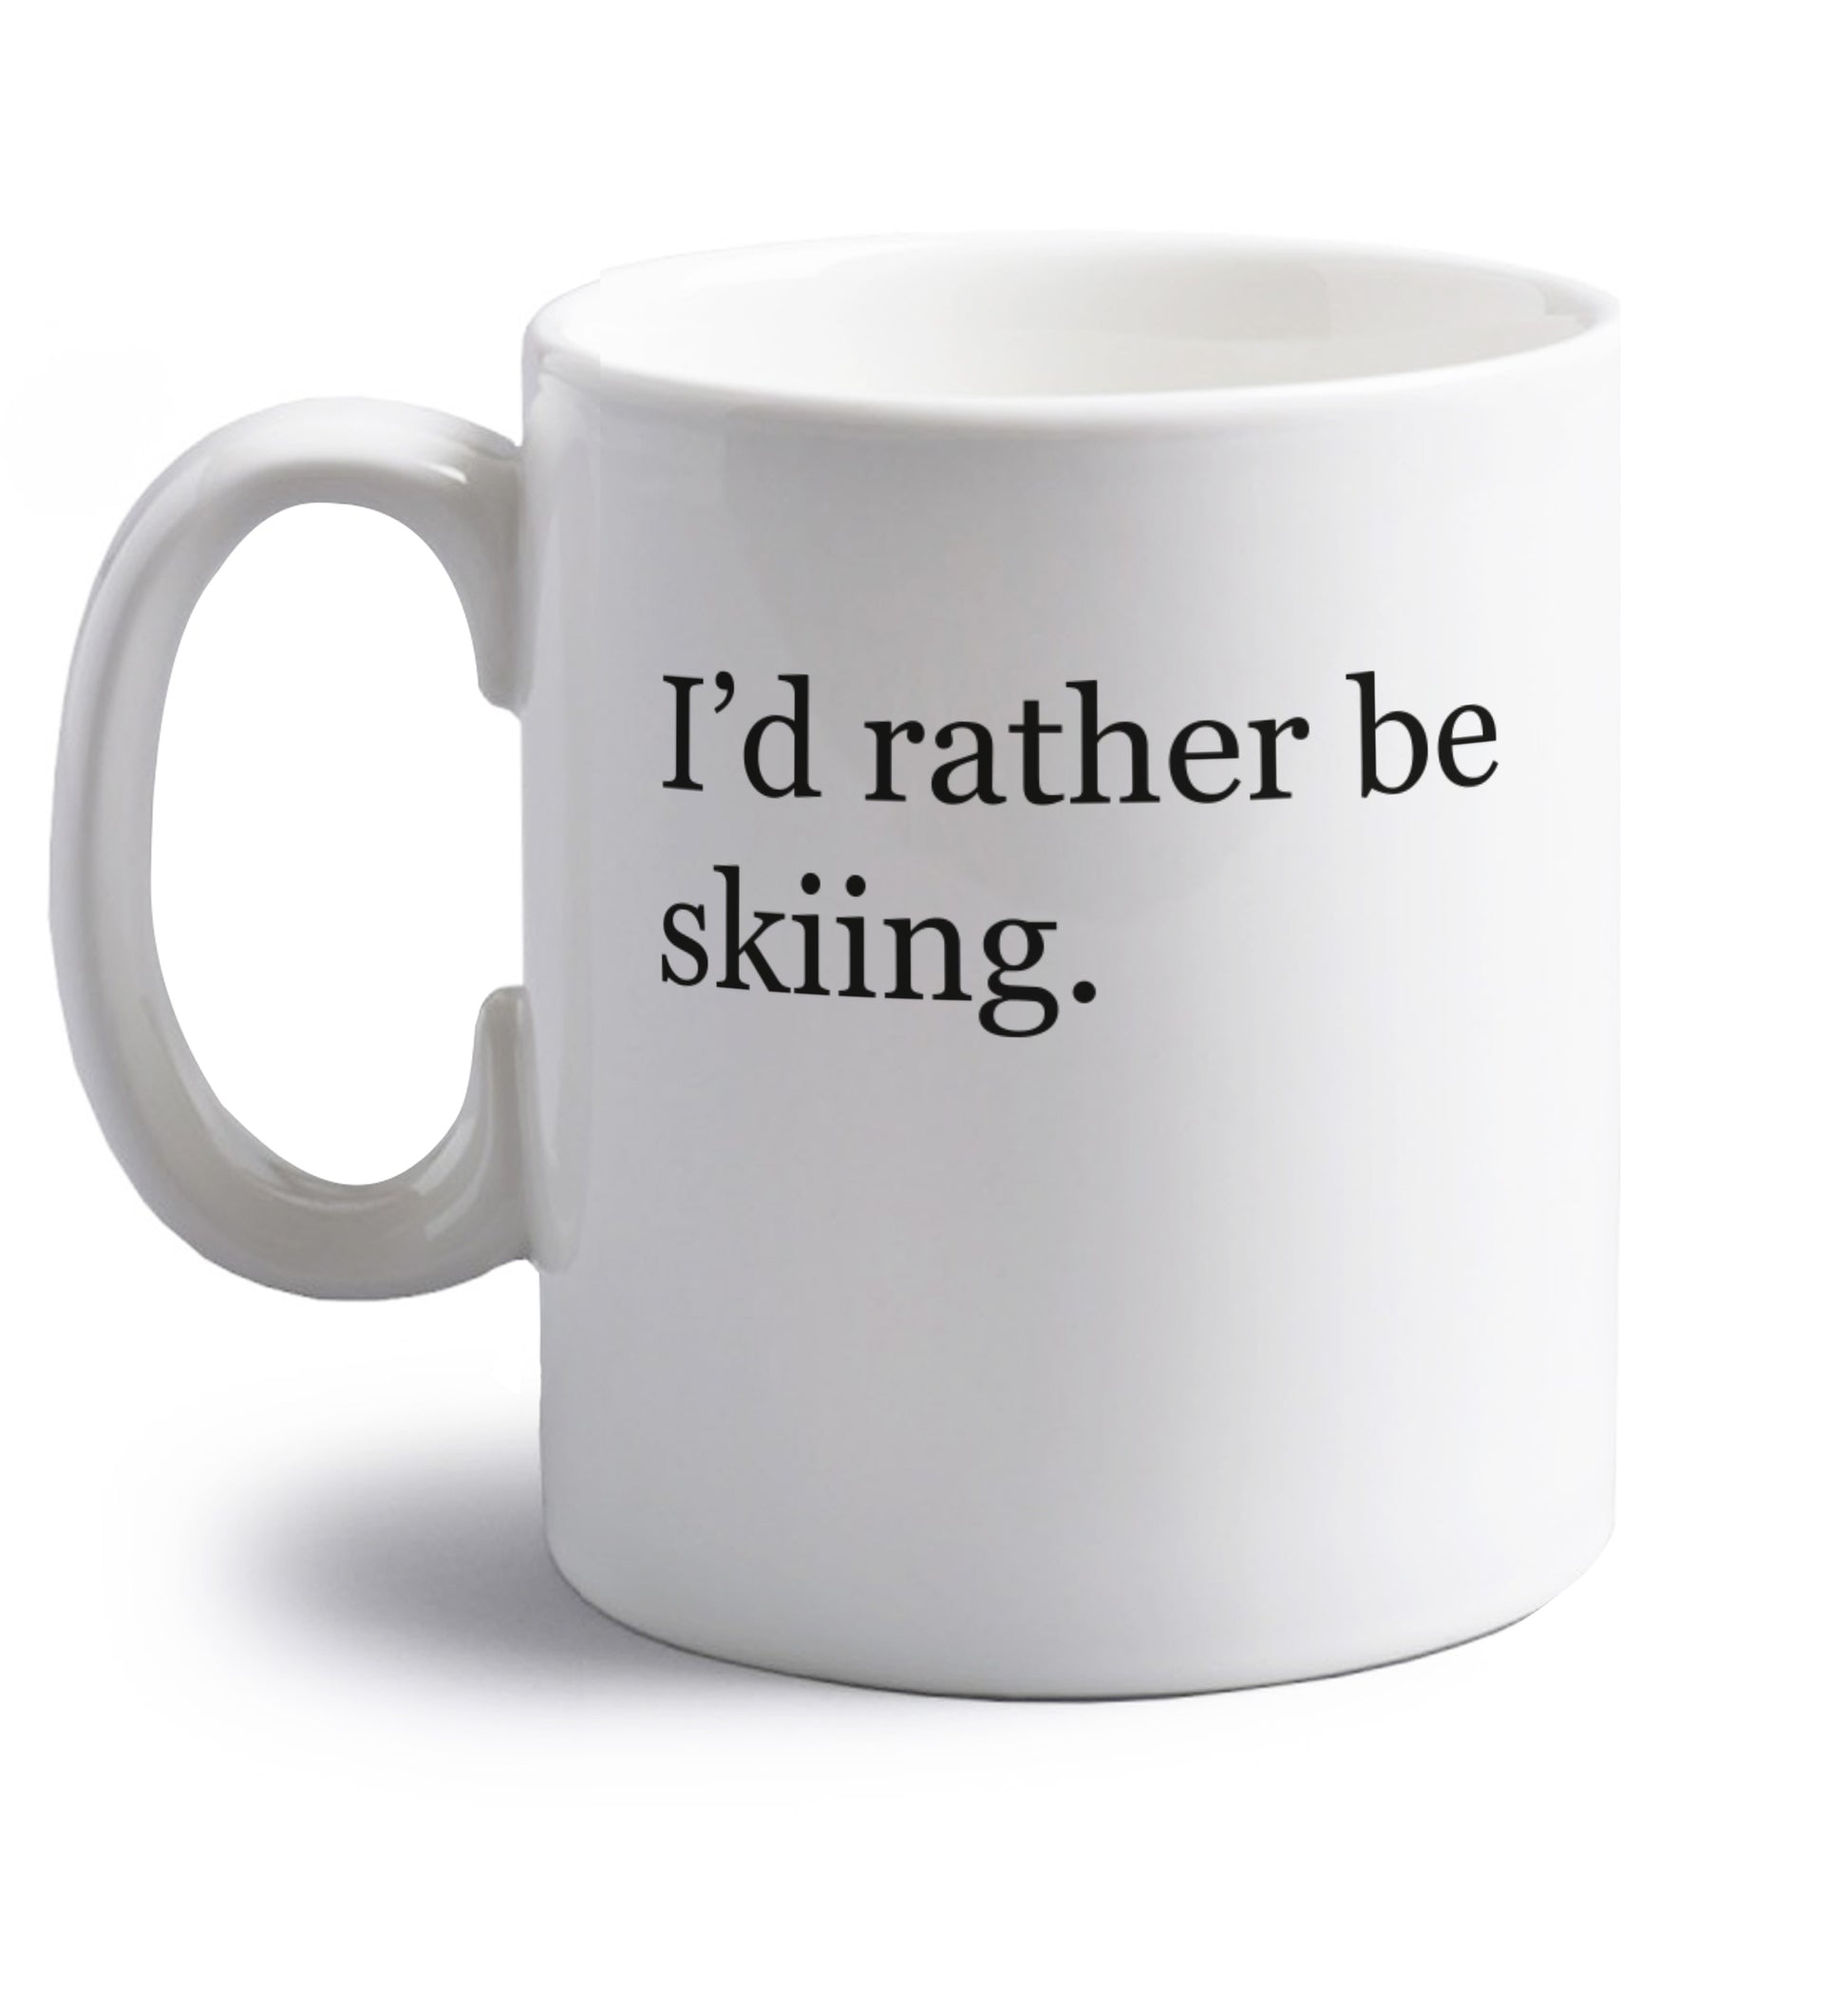 Skiing mode activated right handed white ceramic mug 